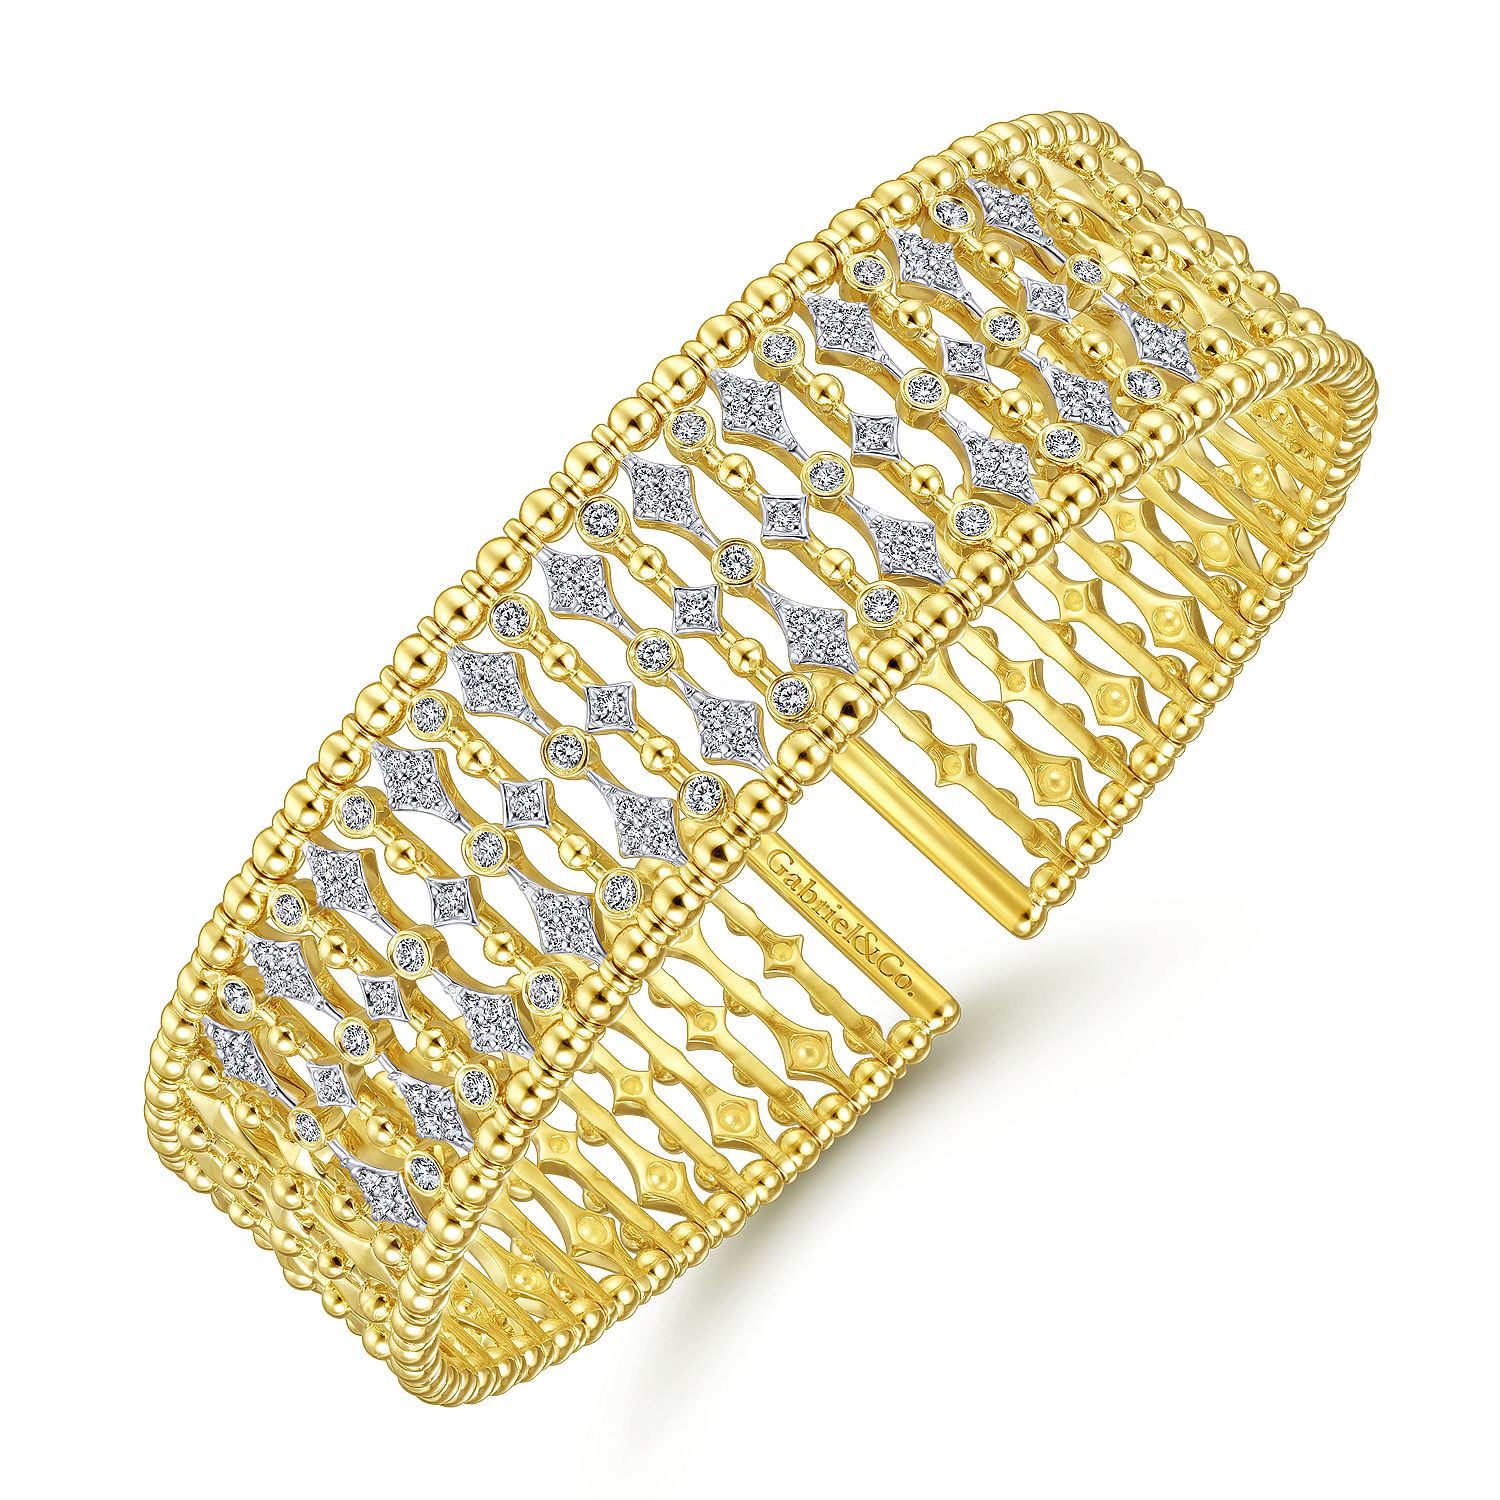 Wide 14K Yellow Gold Cage Cuff Bracelet with Diamond Stations - 0.9 ct - Shot 2